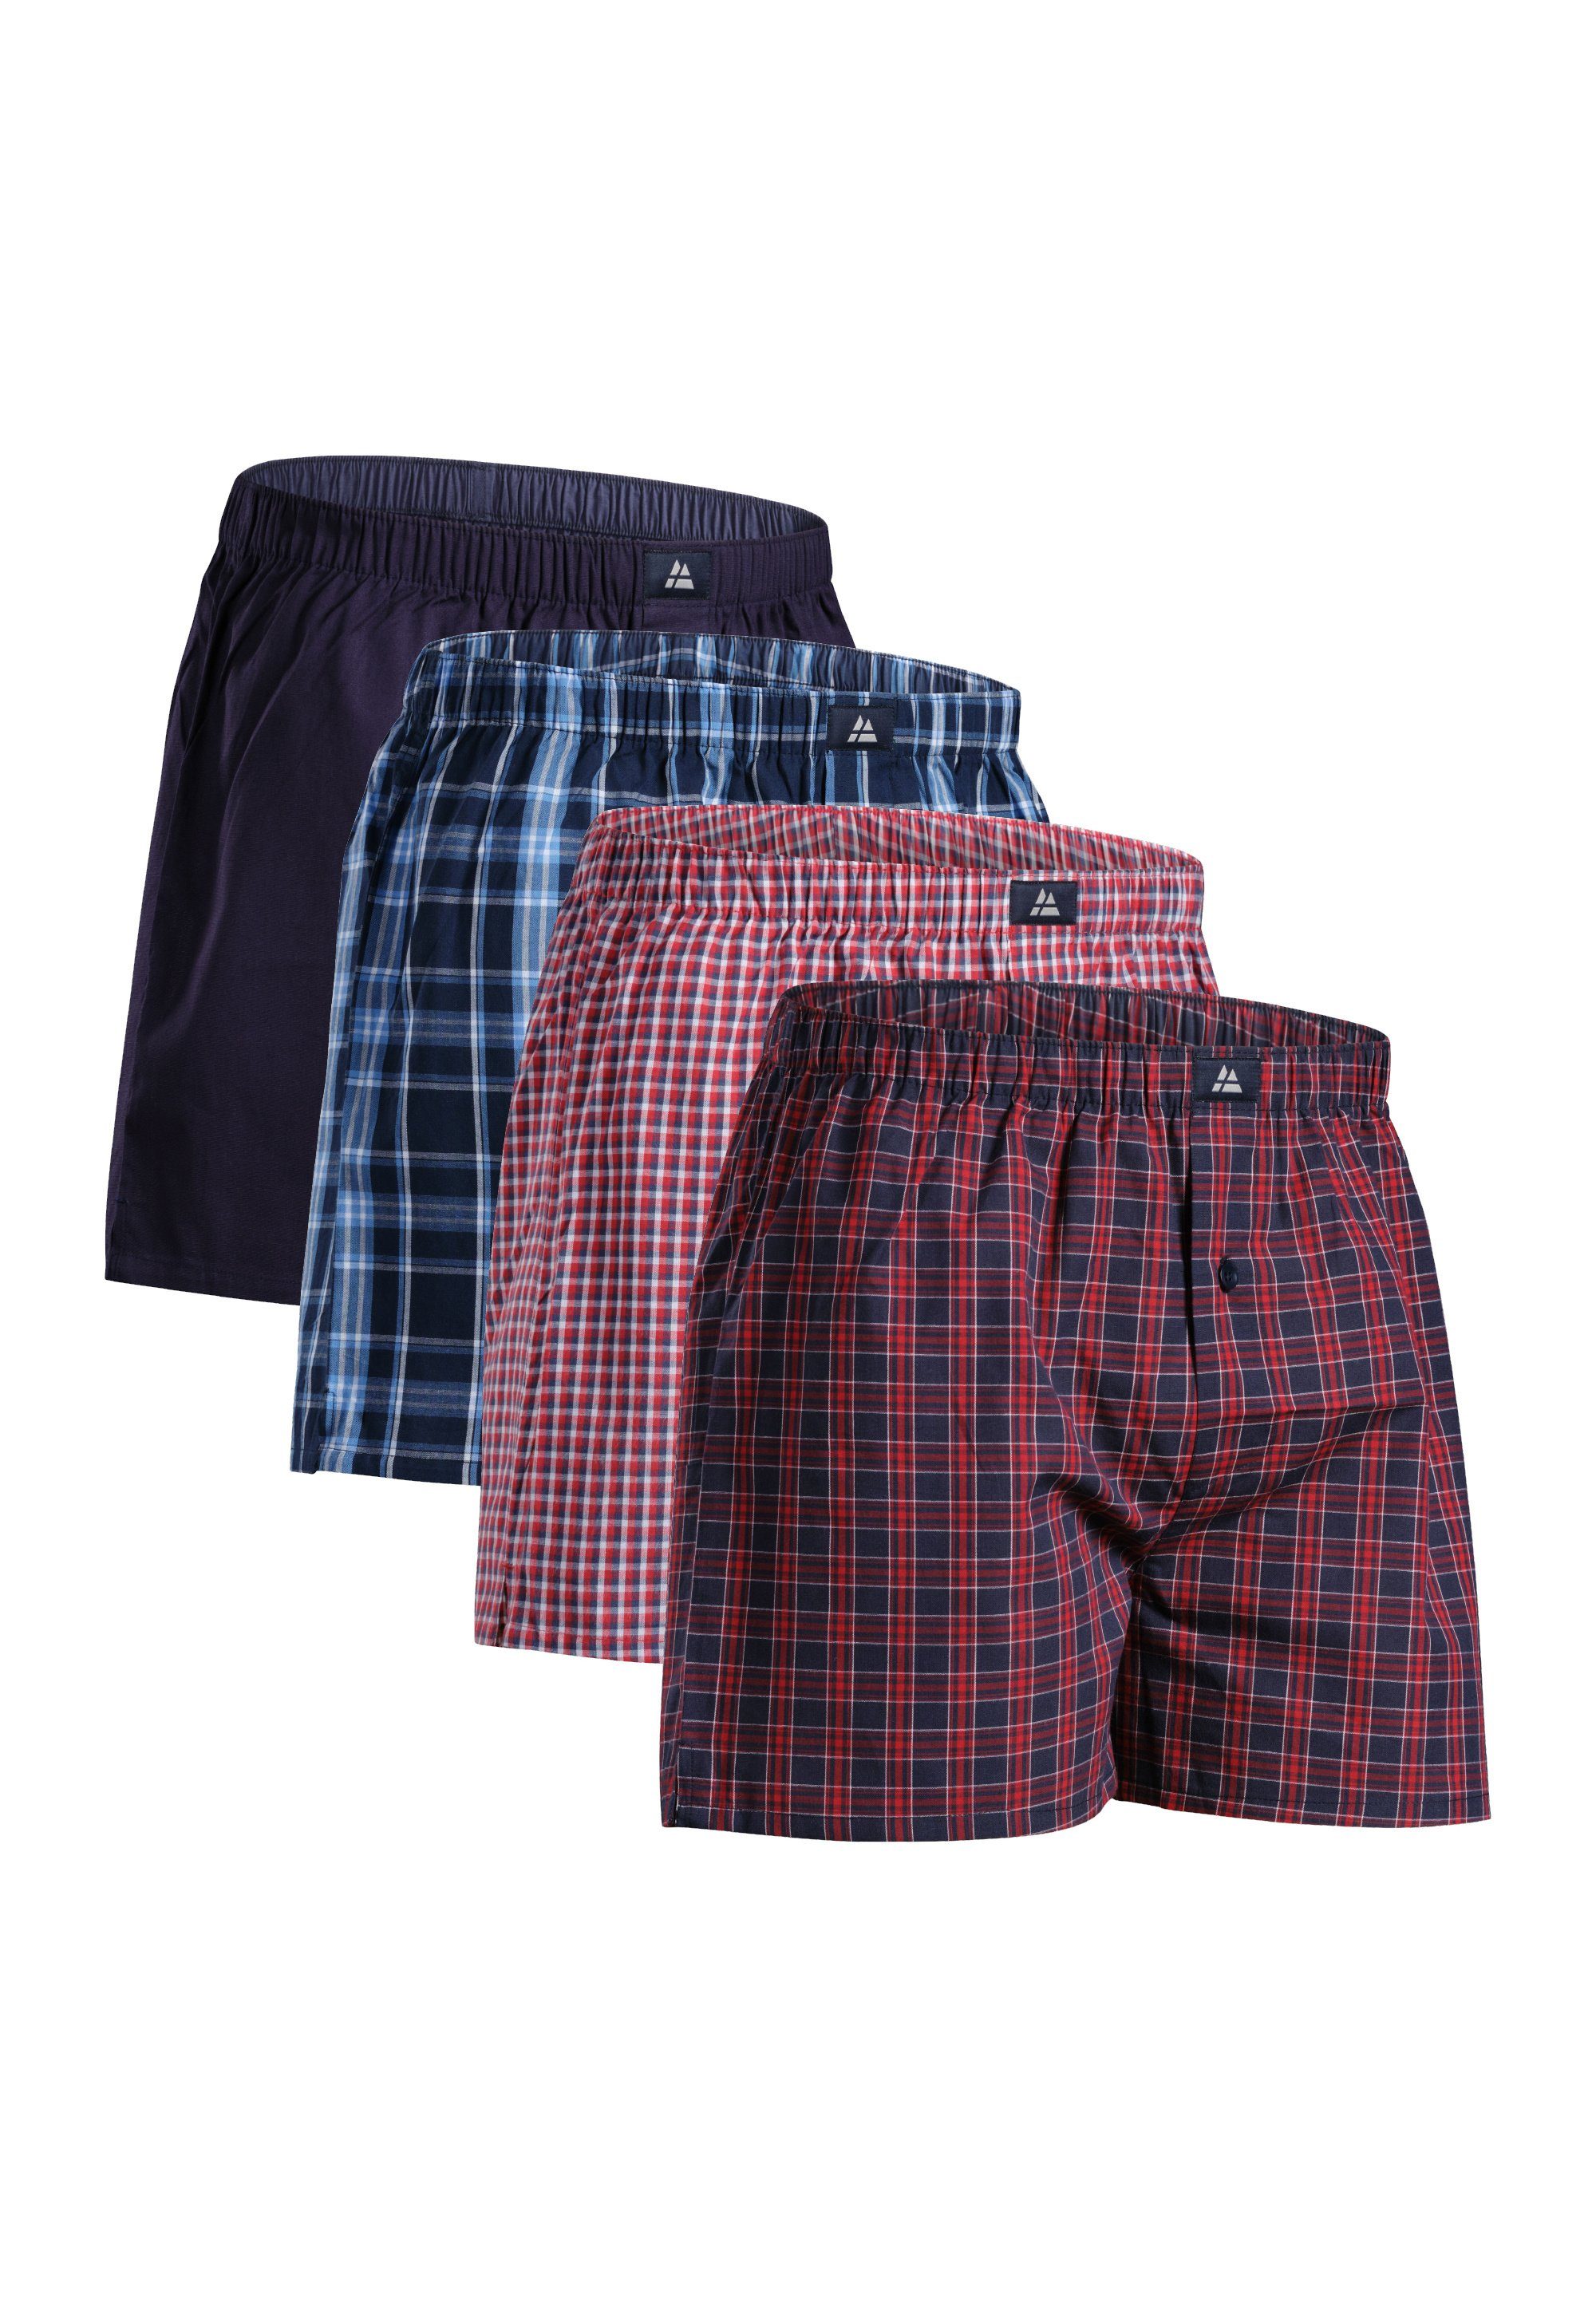 Boxer Weiter blue/red Boxers Baumwolle DANISH 4-St) ENDURANCE Woven (Packung, 100% Organic mix